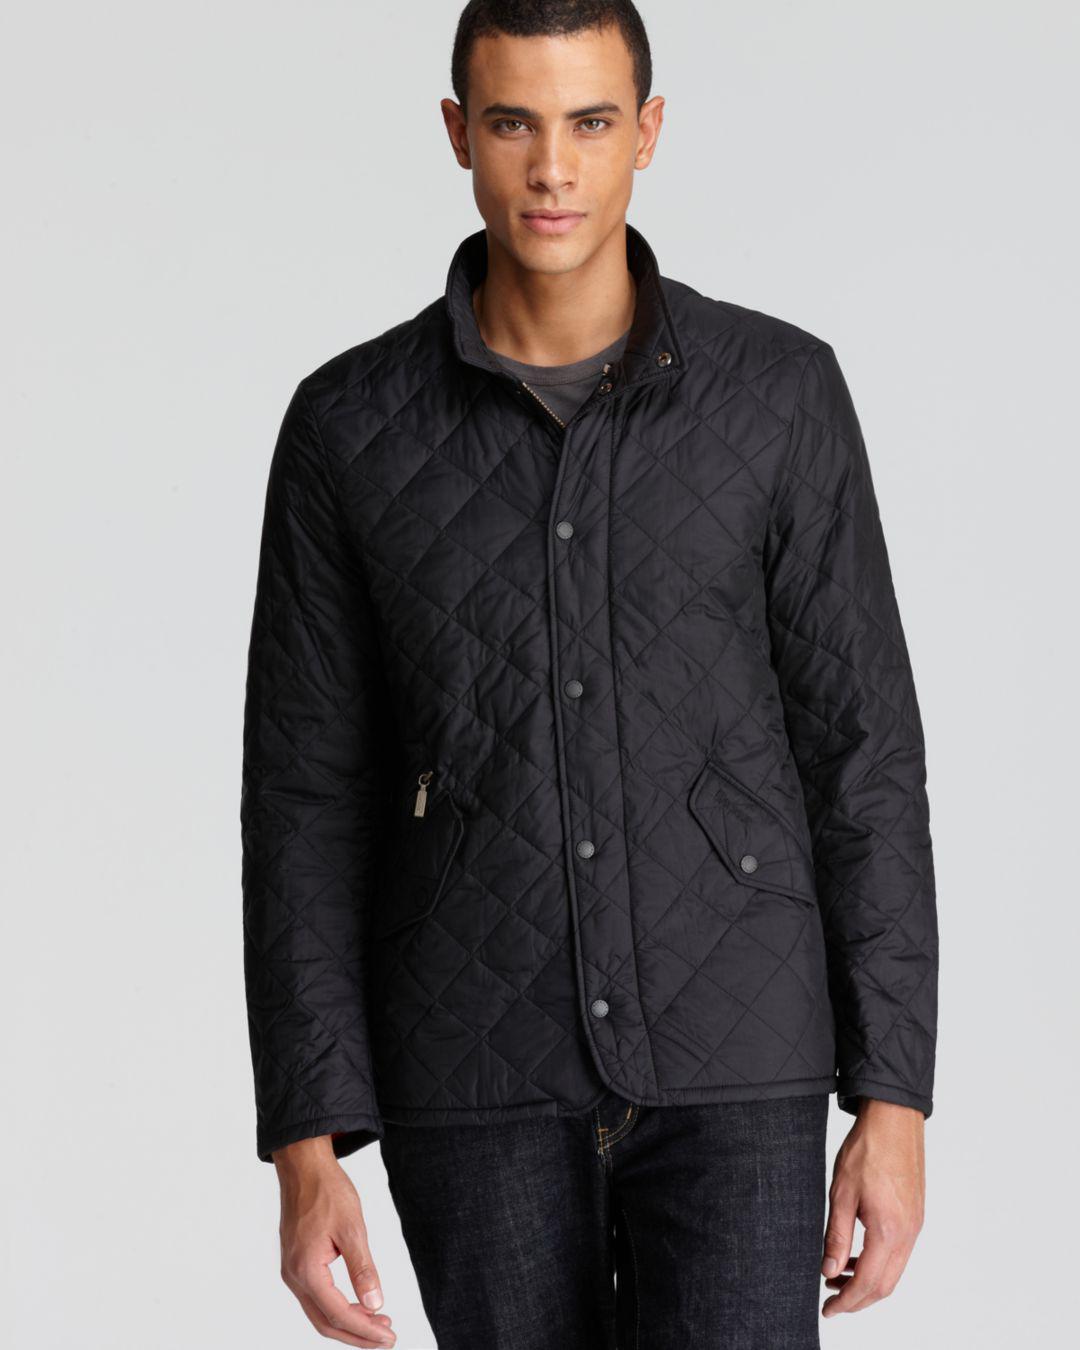 Lyst - Barbour Flyweight Chelsea Quilted Jacket in Black for Men